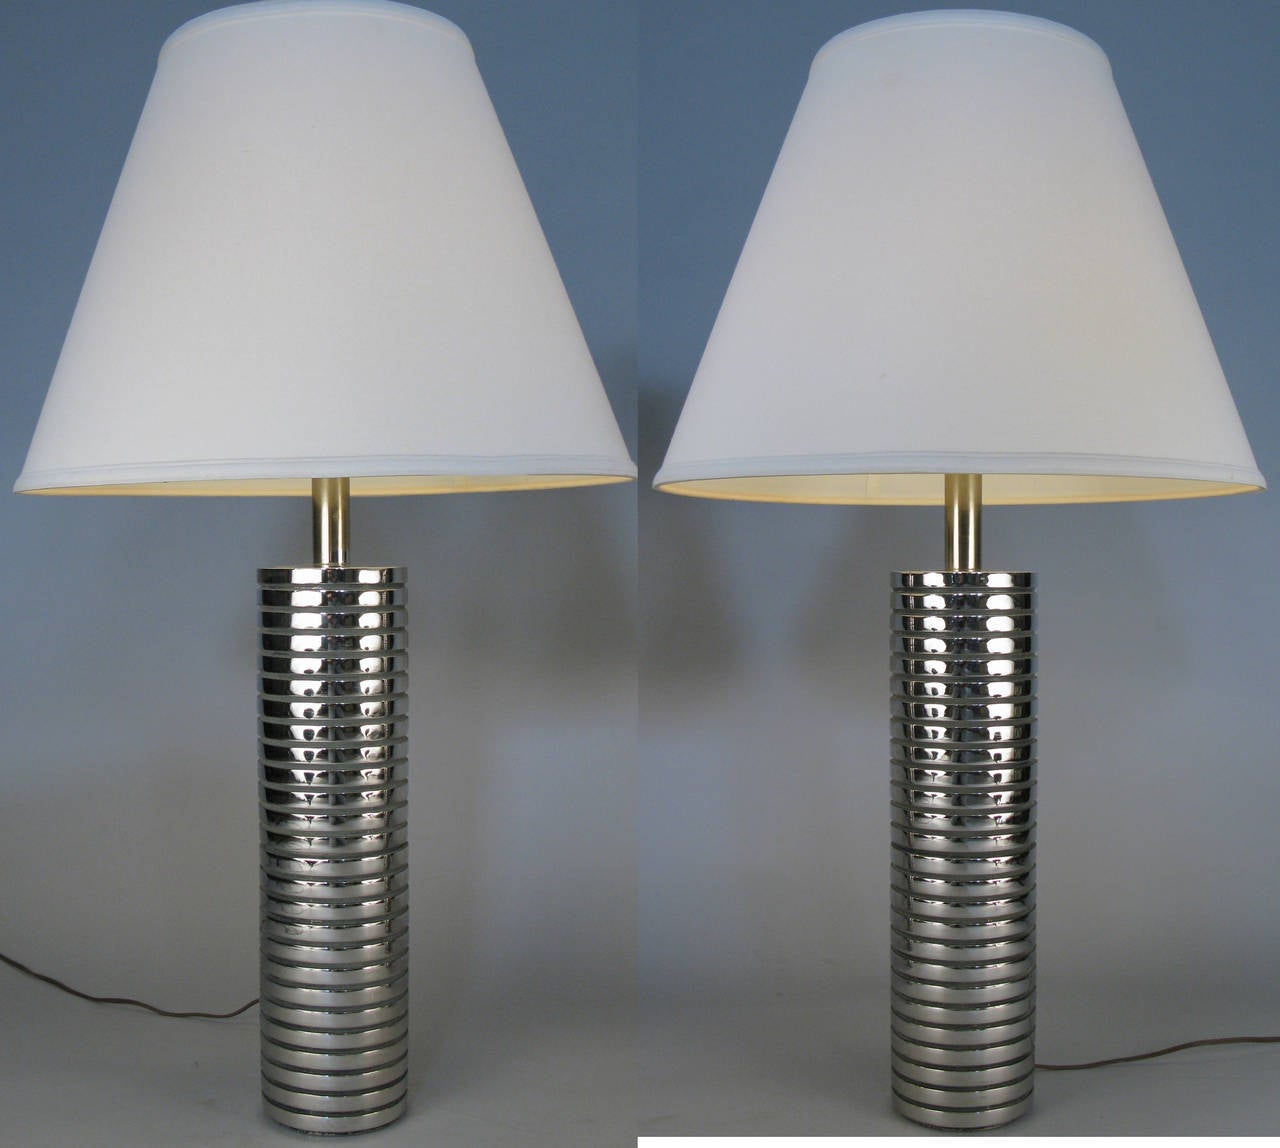 A very stylish pair of vintage 1950s table lamps with heavy bases of chromed steel ribbed cylinders, with their original white shades.